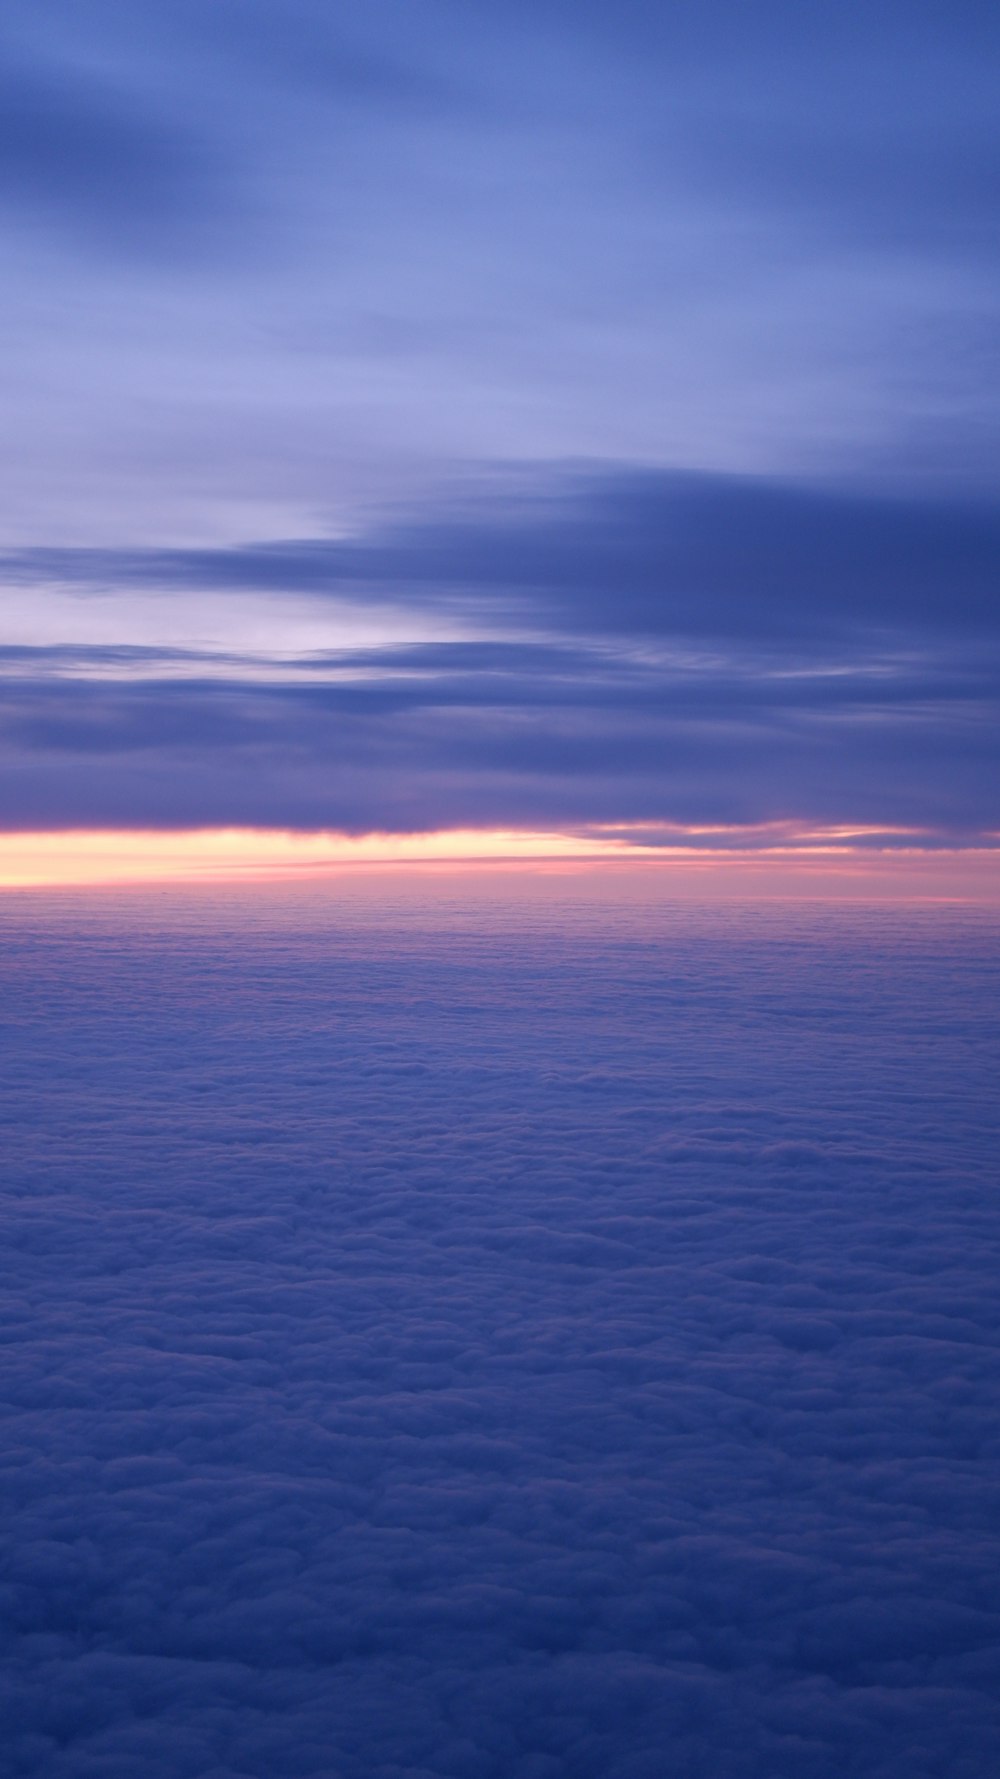 a view of the sky and clouds from an airplane